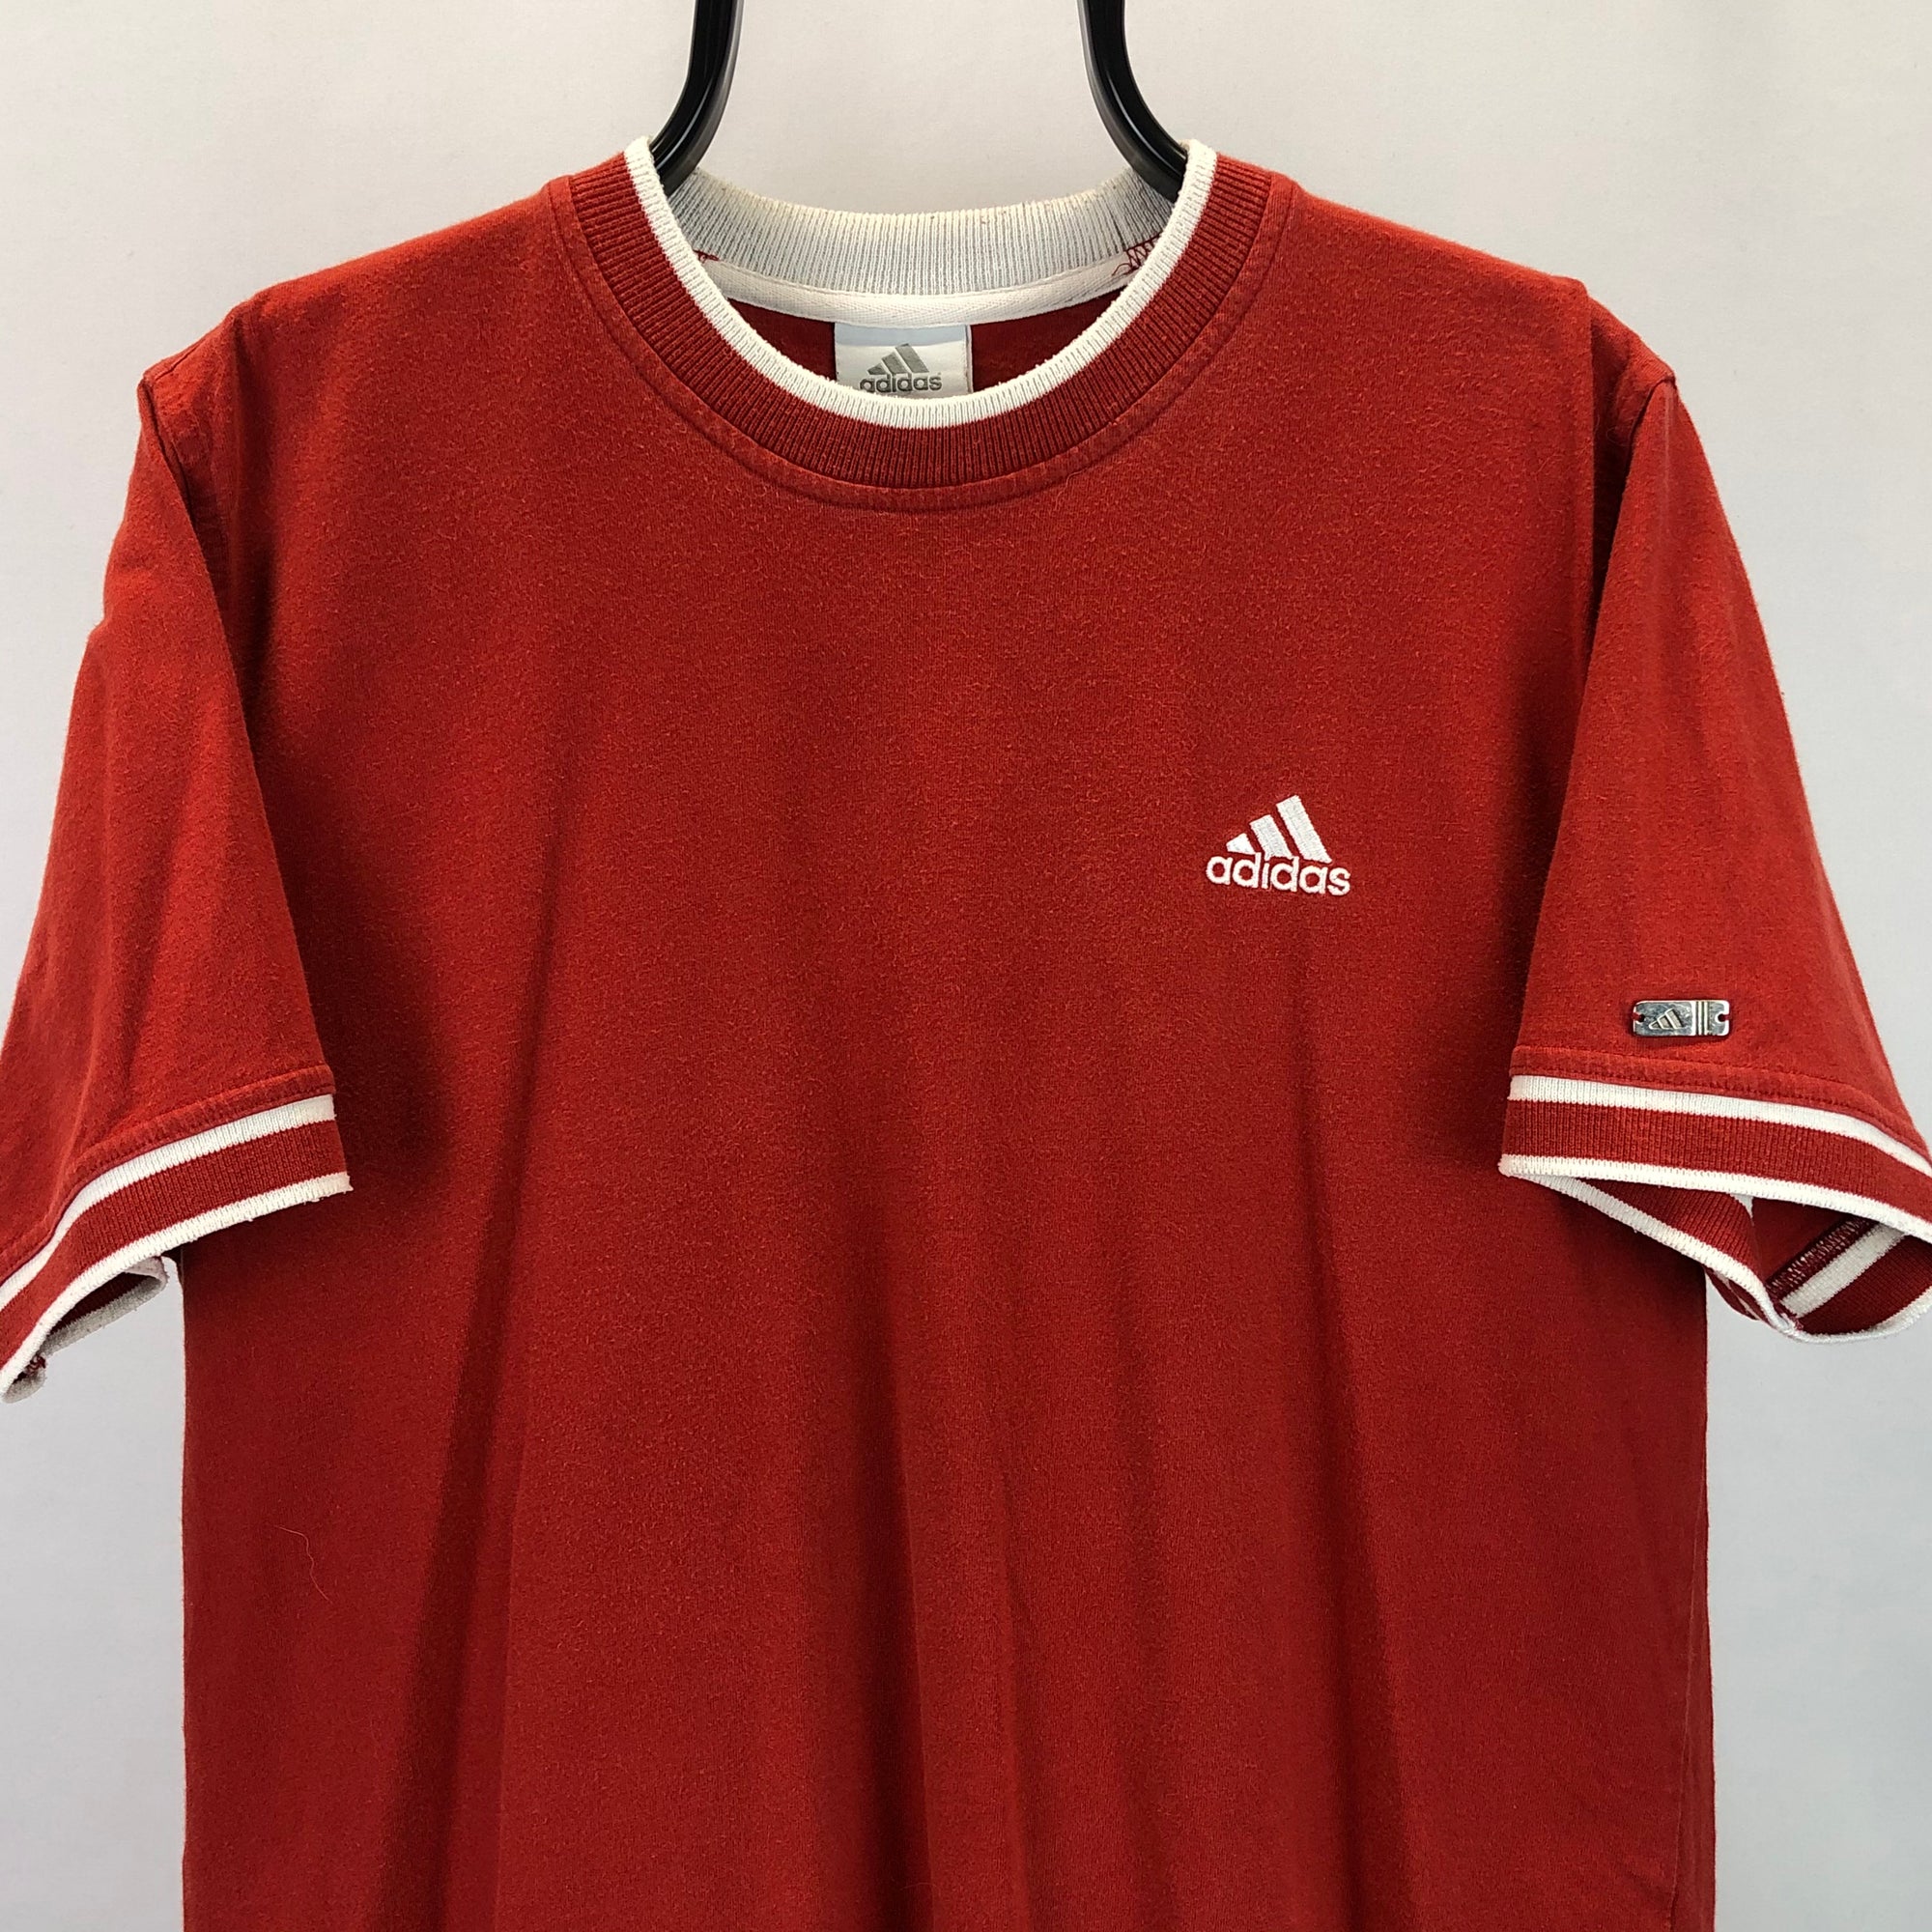 Adidas Embroidered Small Logo Tee in Burnt Red - Men's Medium/Women's Large